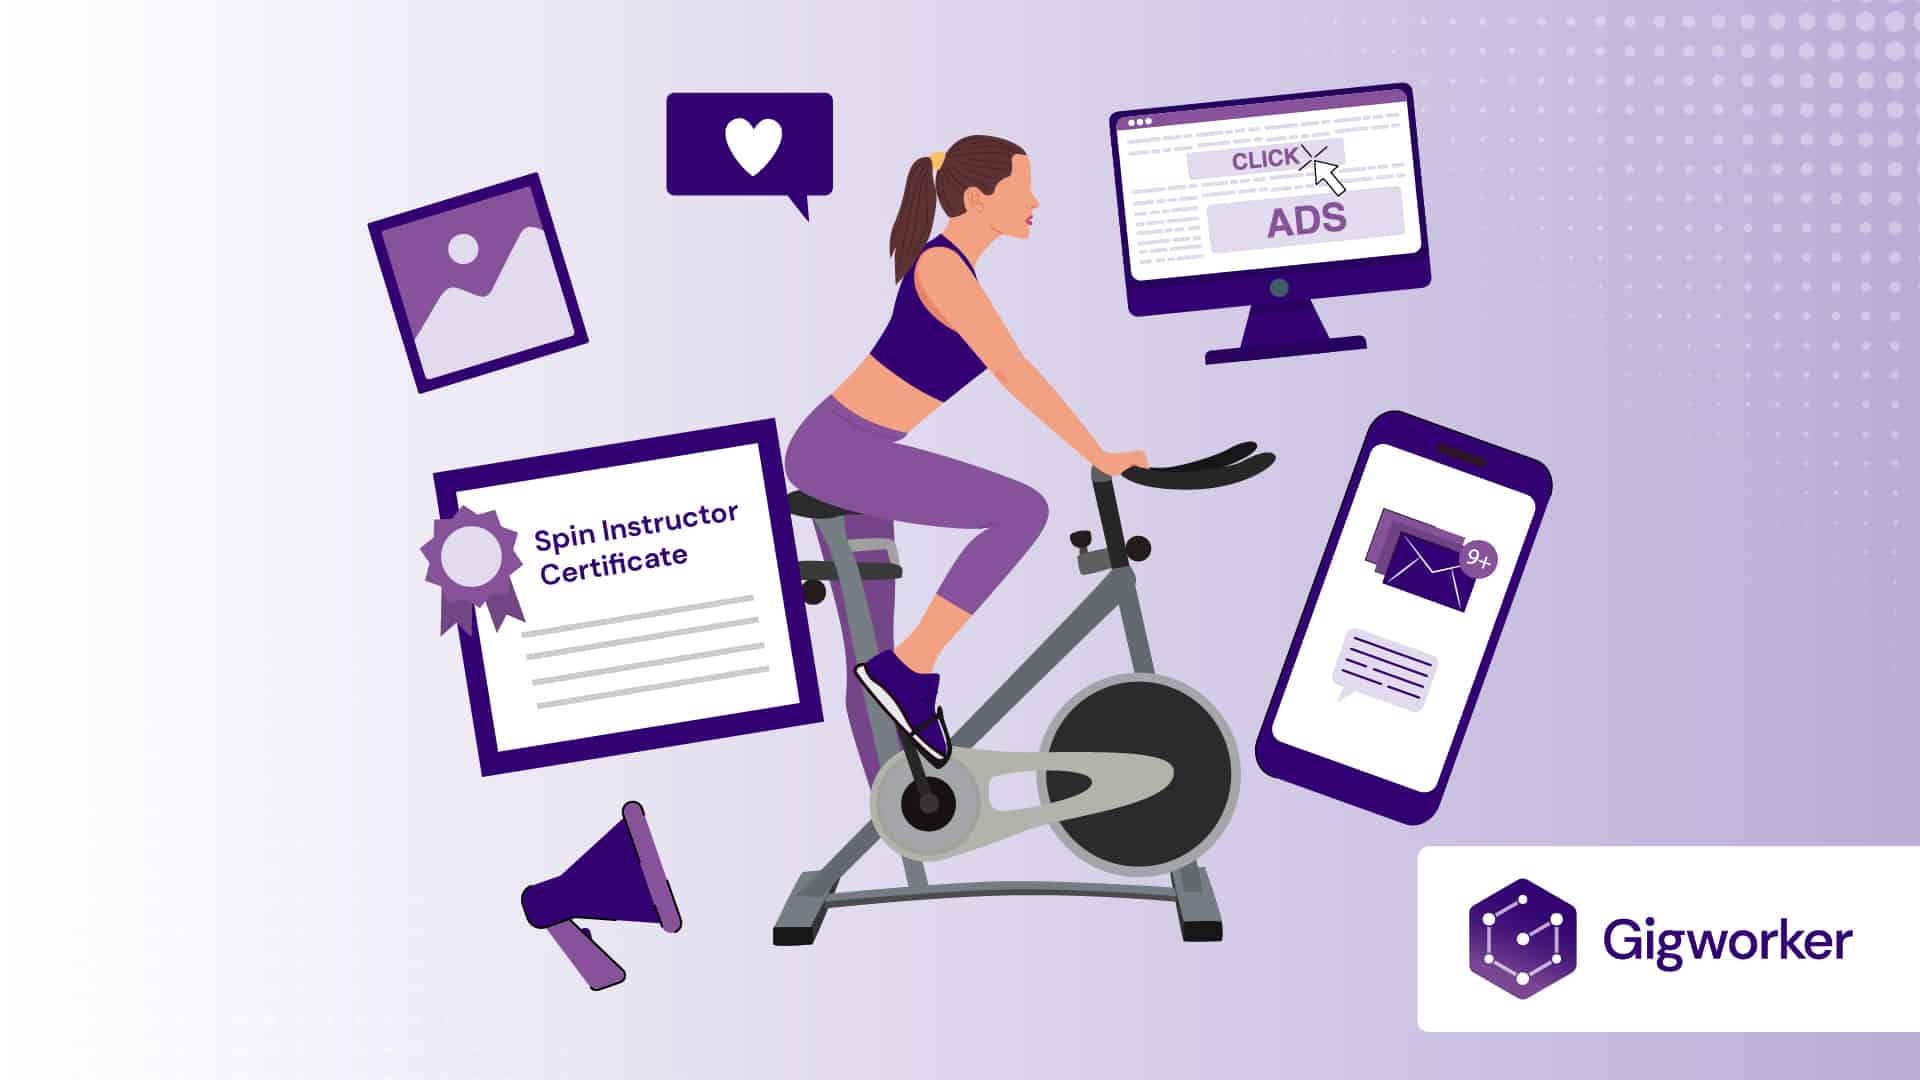 vector graphic showing an illustration of a lady cycling with a spin instructor certificate graphics related to how to become a spin instructor